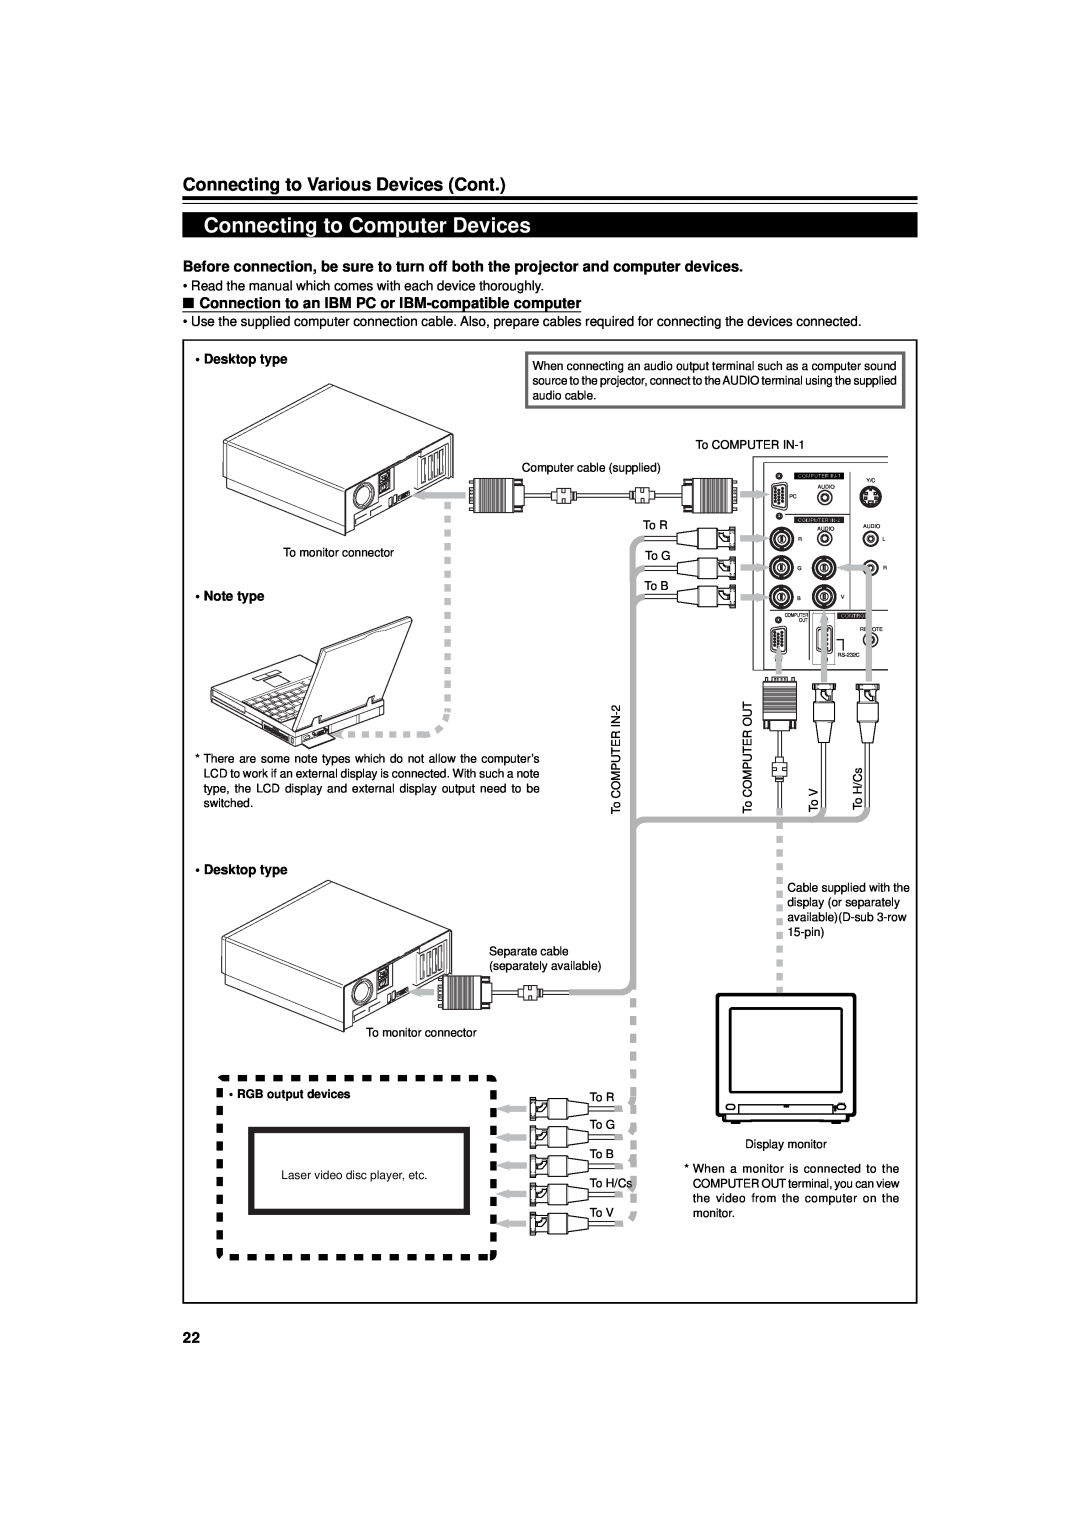 JVC DLA-G11U manual Connecting to Computer Devices, Connecting to Various Devices Cont, Desktop type, Note type 